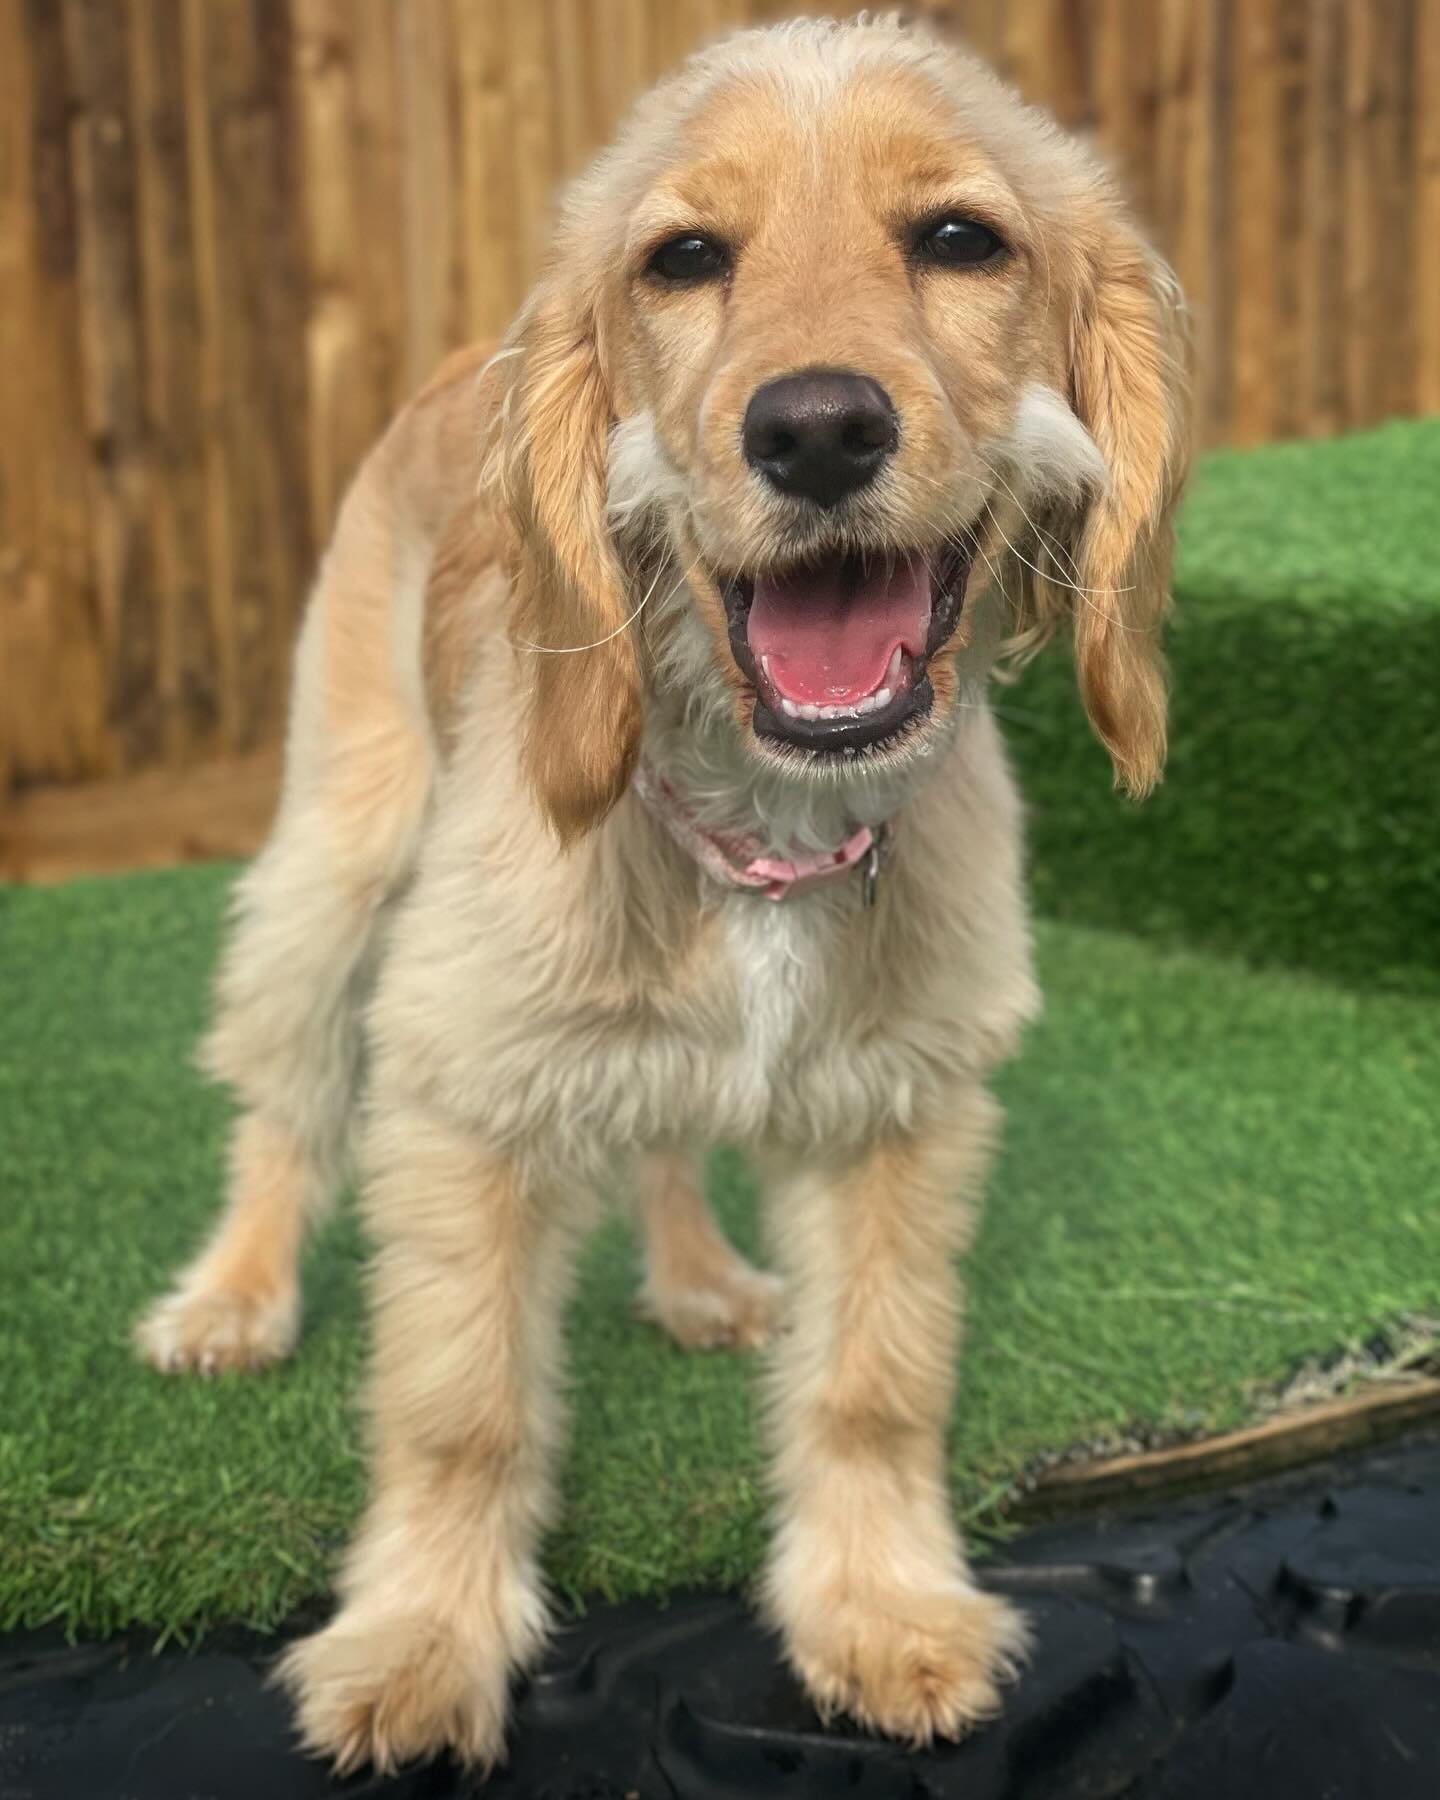 Mark captured this truly beautiful image of Margot earlier, just look at that Cheshire smile! The joy that pooch&rsquo;s Yard - doggy day care brings to your dog&rsquo;s lives!